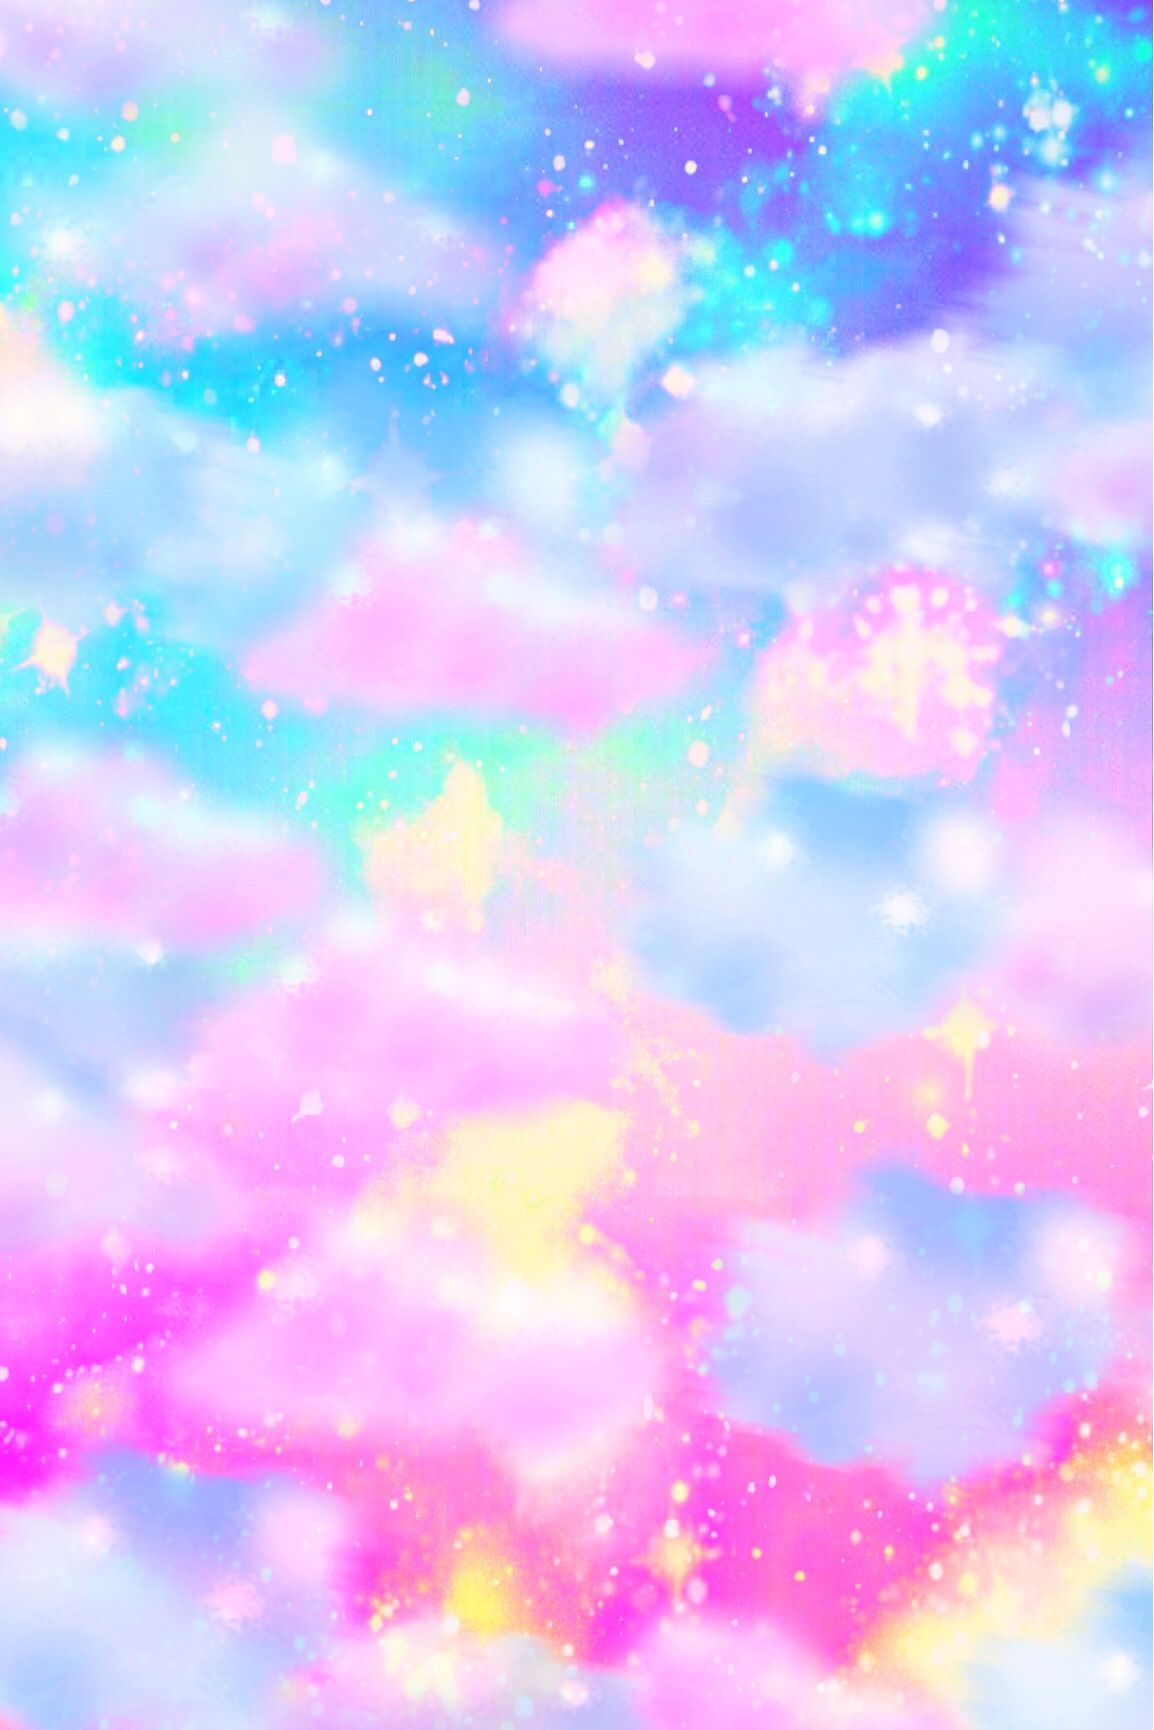 Cotton Candy Clouds Galaxy Wallpaper. Galaxy wallpaper, Cotton candy sky, Beautiful nature picture